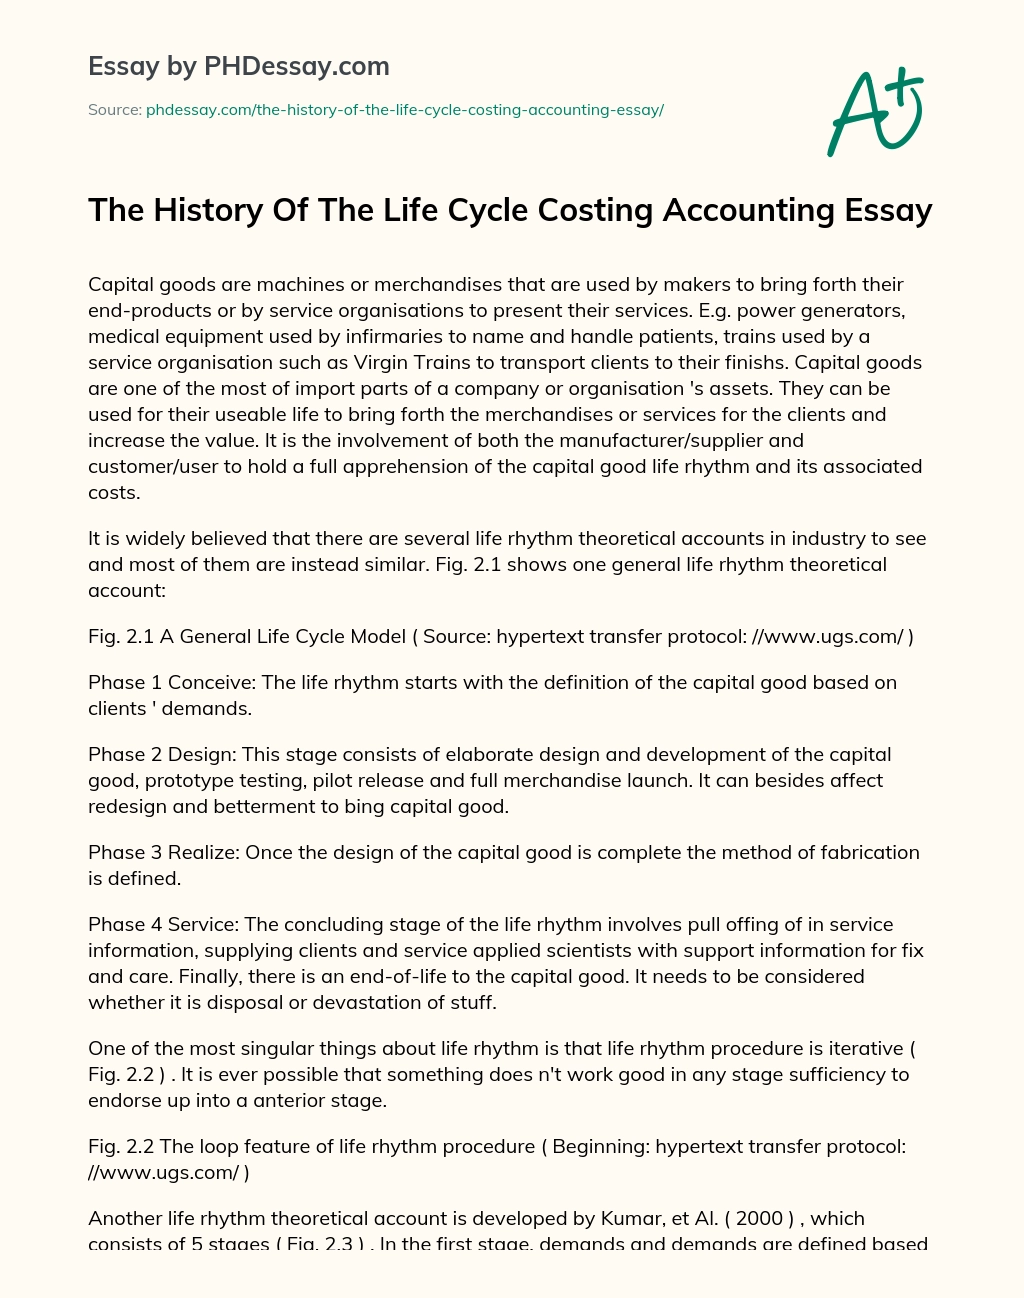 The History Of The Life Cycle Costing Accounting Essay essay